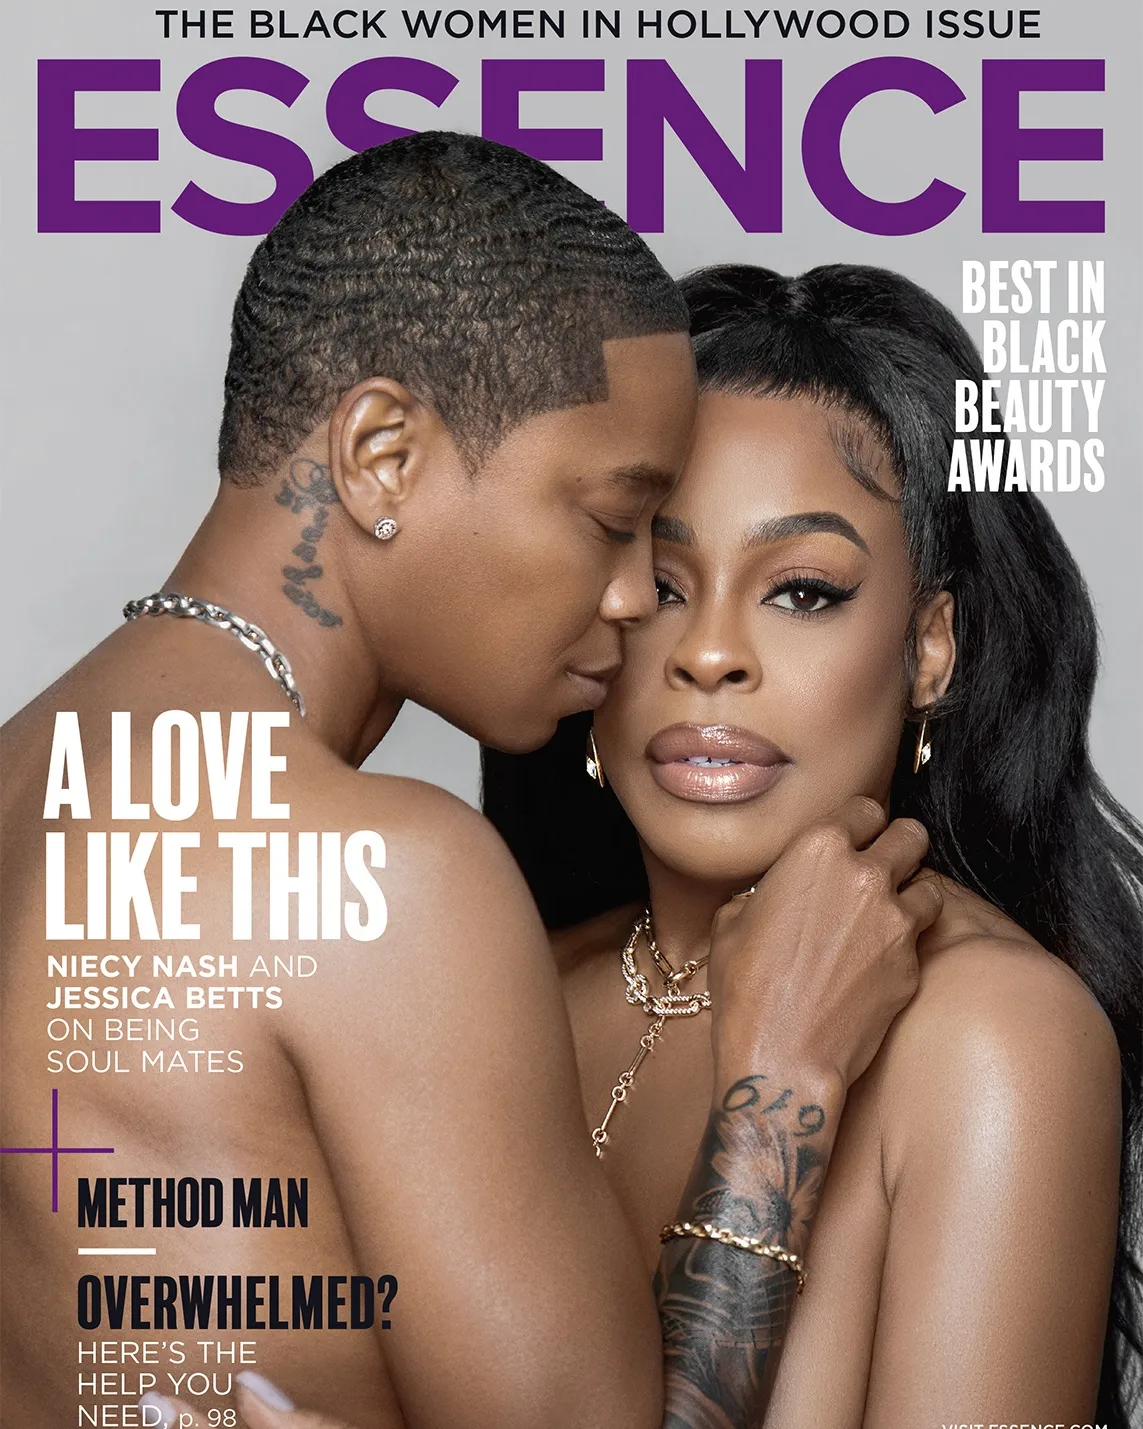 The Betts Essence cover with Niecy Nash and Jessica Betts (Photo Credit: Essence)